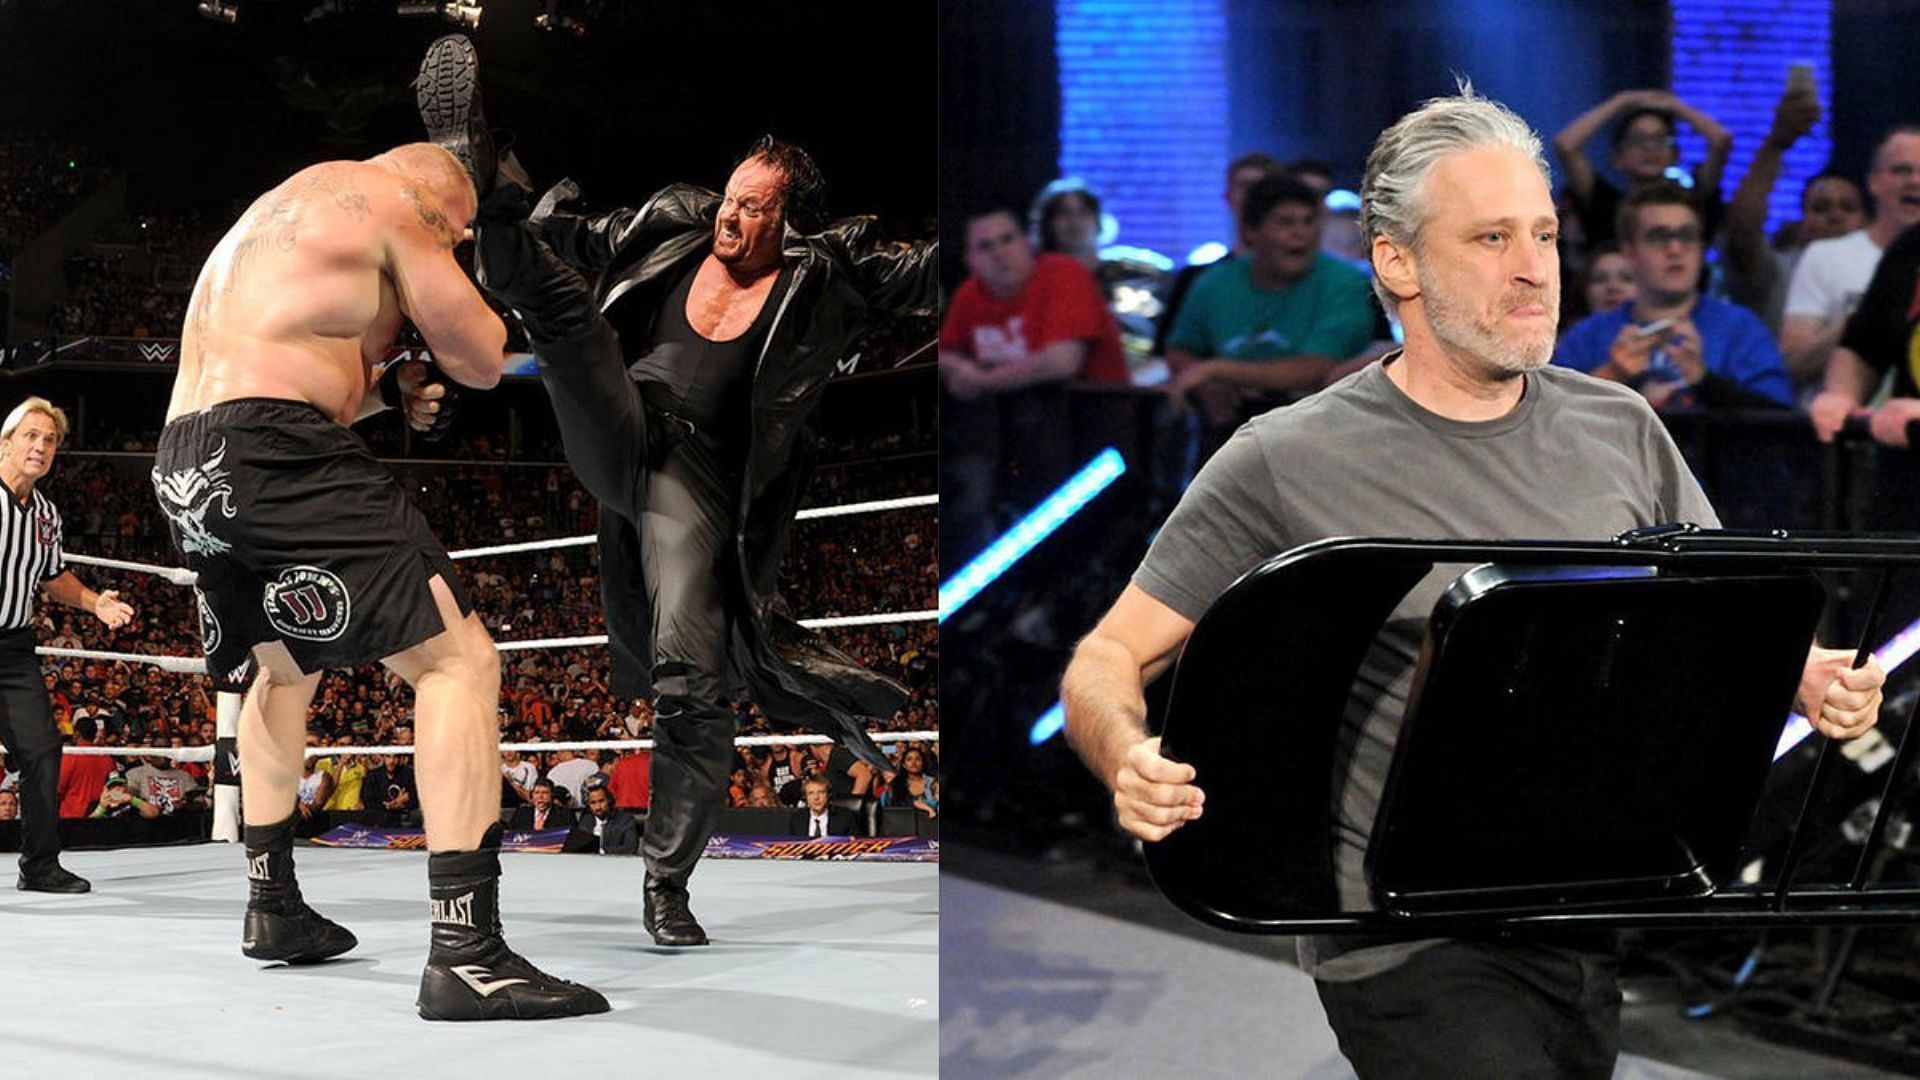 WWE has pulled some major swerves at SummerSlam over the years.